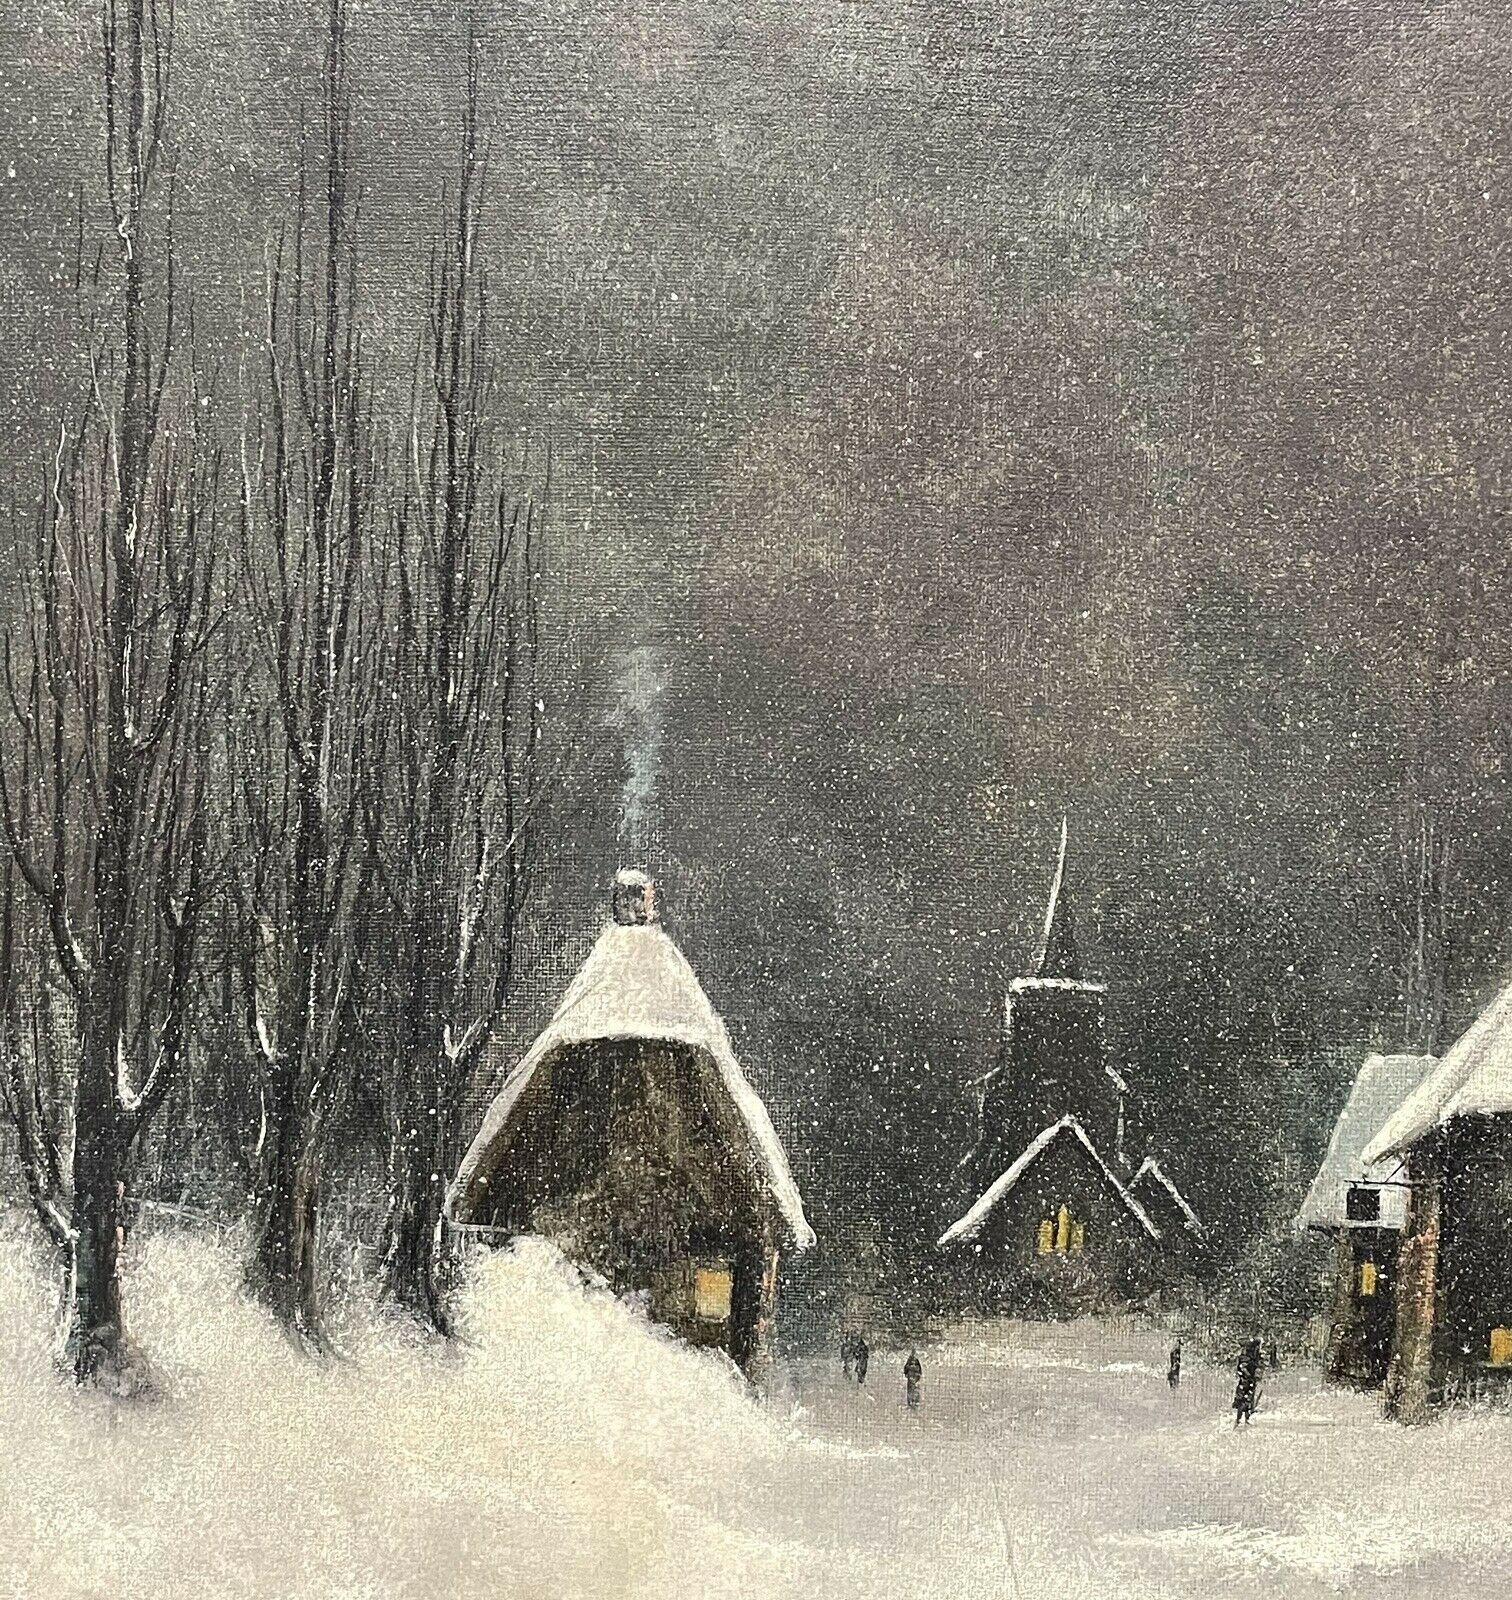 SIGNED ORIGINAL OIL PAINTING - FIGURES WALKING THROUGH WINTER SNOW VILLAGE PATH - Victorian Painting by Nils Hans Christiansen